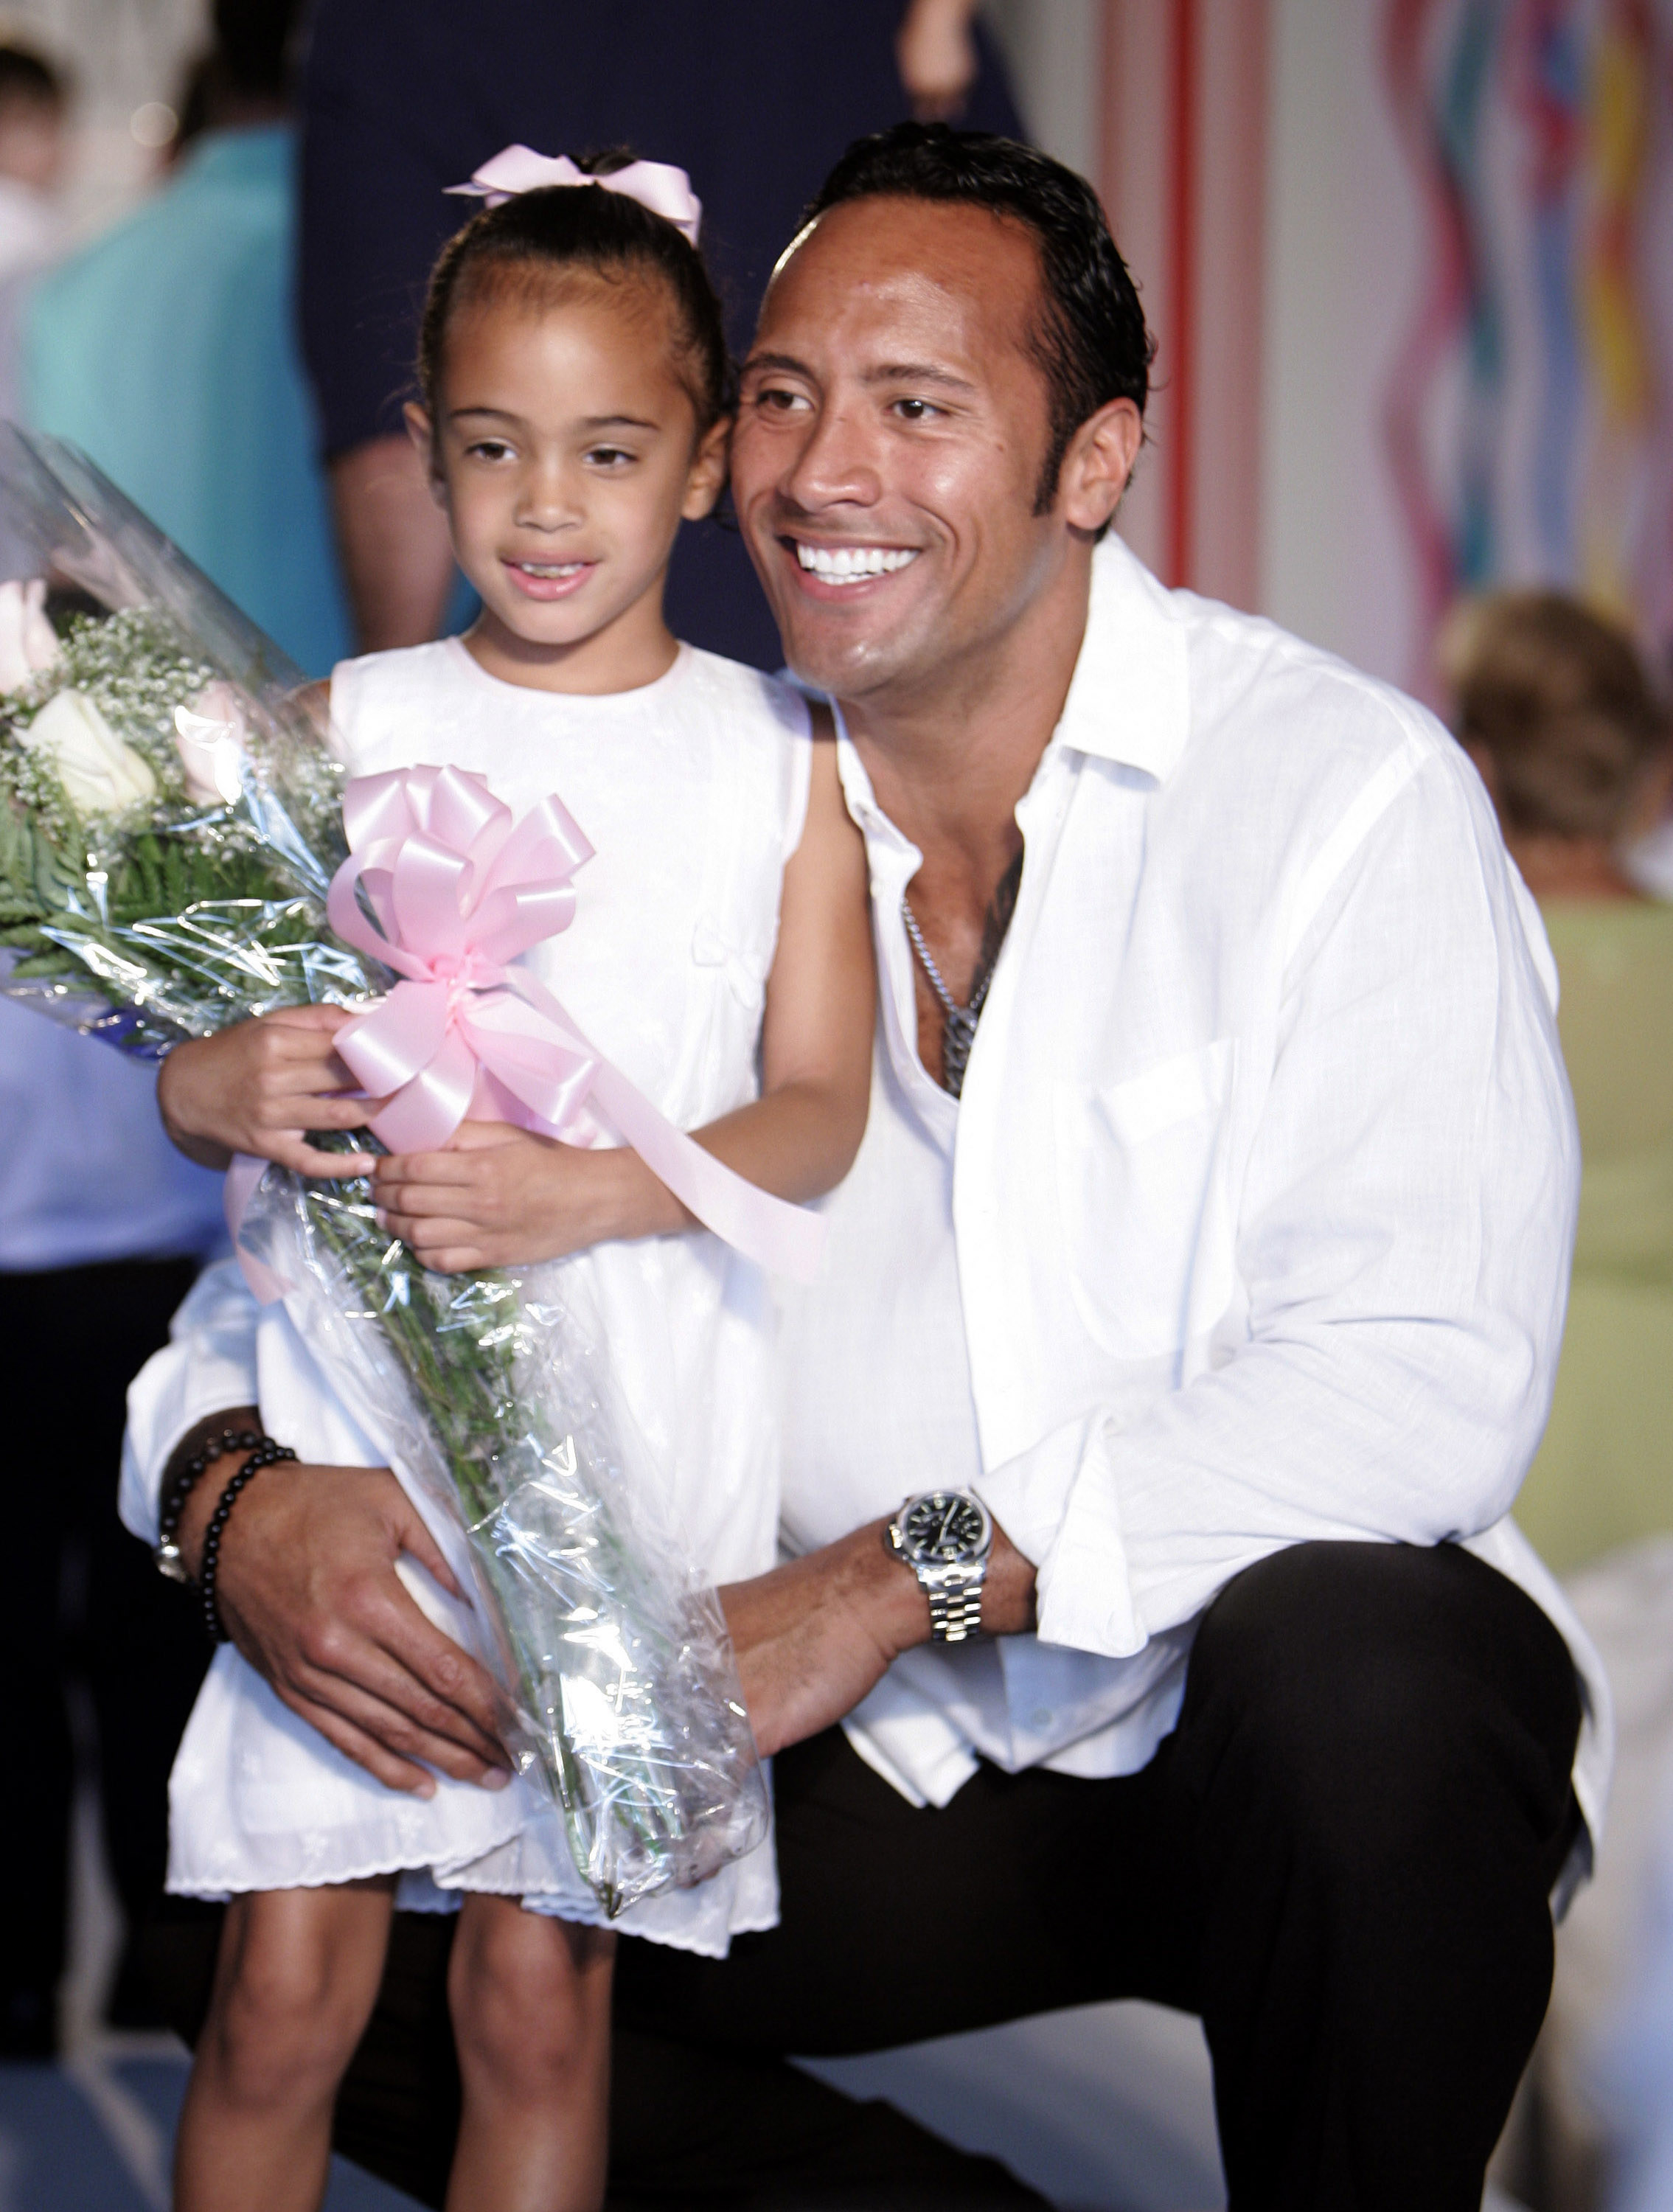 simone holding flowers as her dad bends down to hold her for a photo